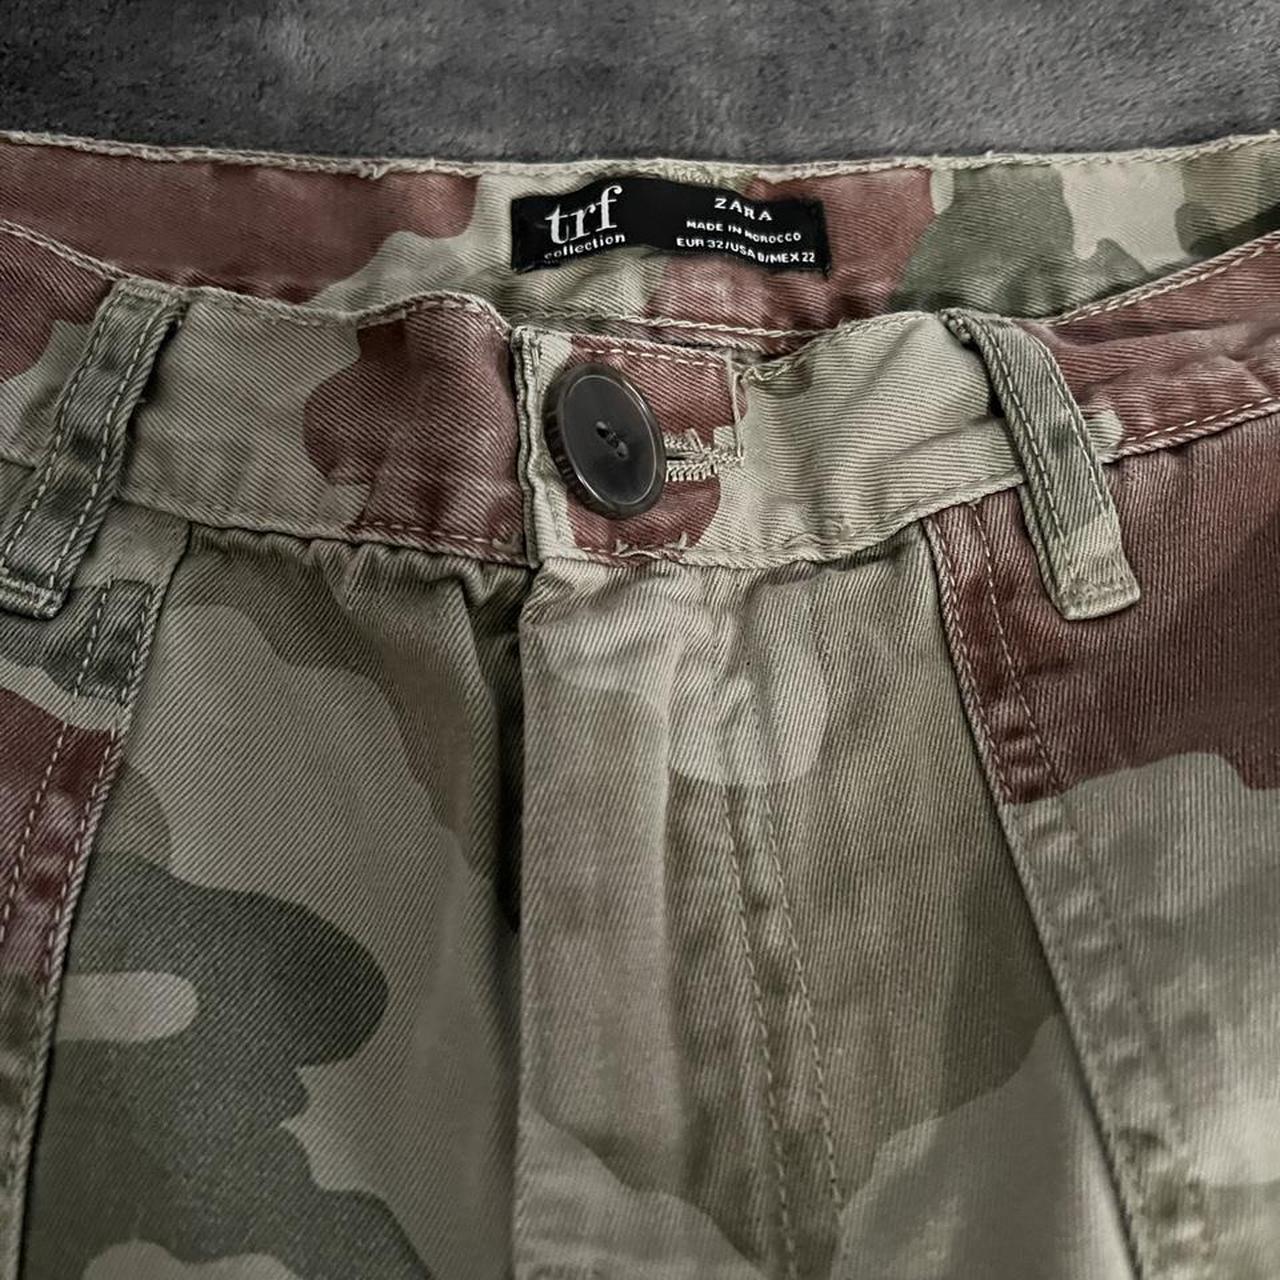 TRF Collection Zara Camouflage Pants Perfect For.... - Depop